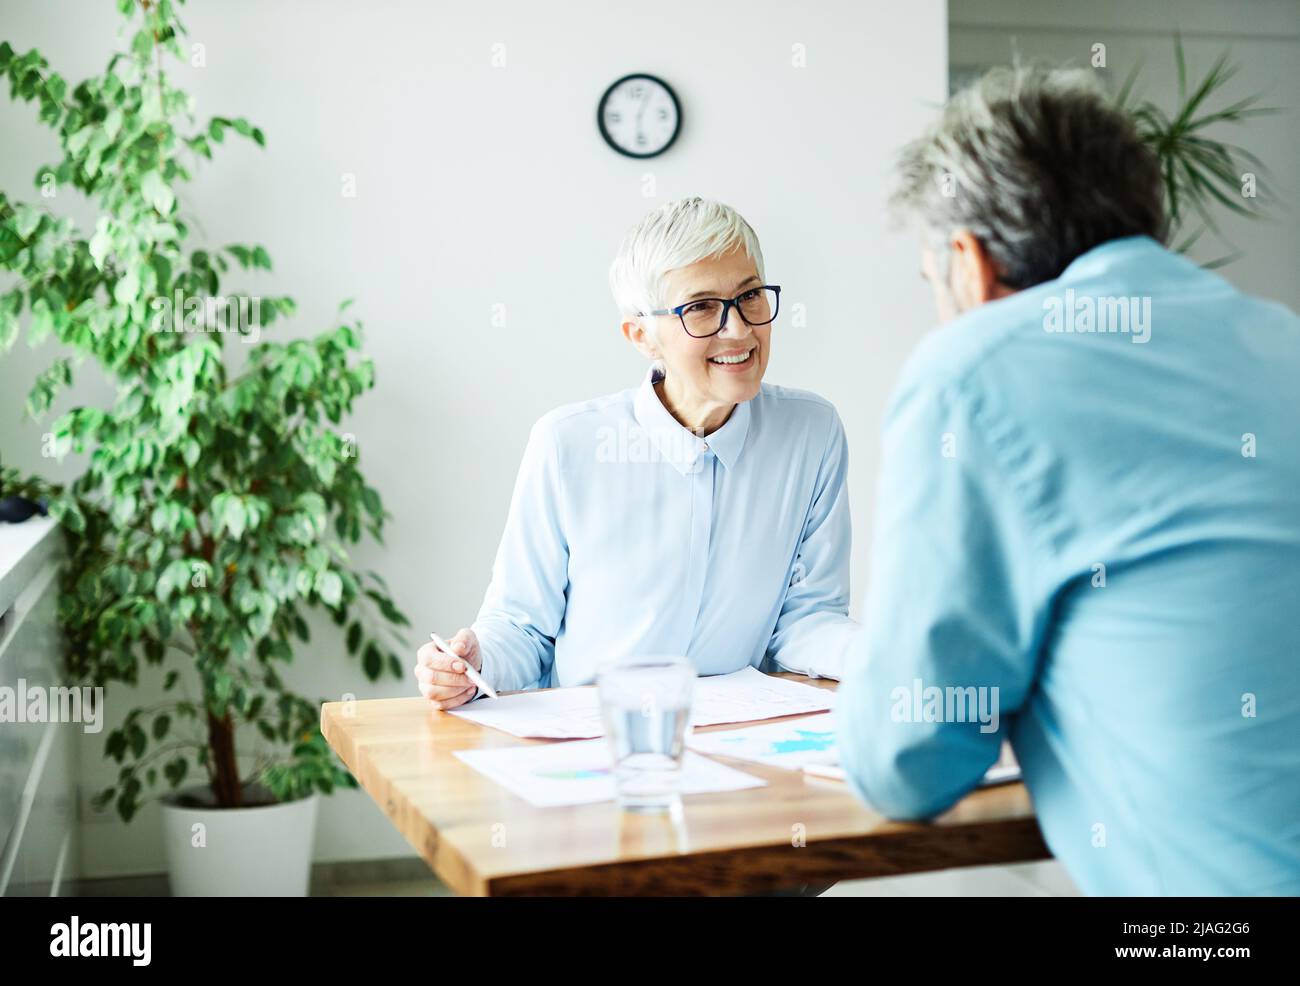 business office discussion teamwork senior meeting businesswoman colleague woman vitality elderly Stock Photo